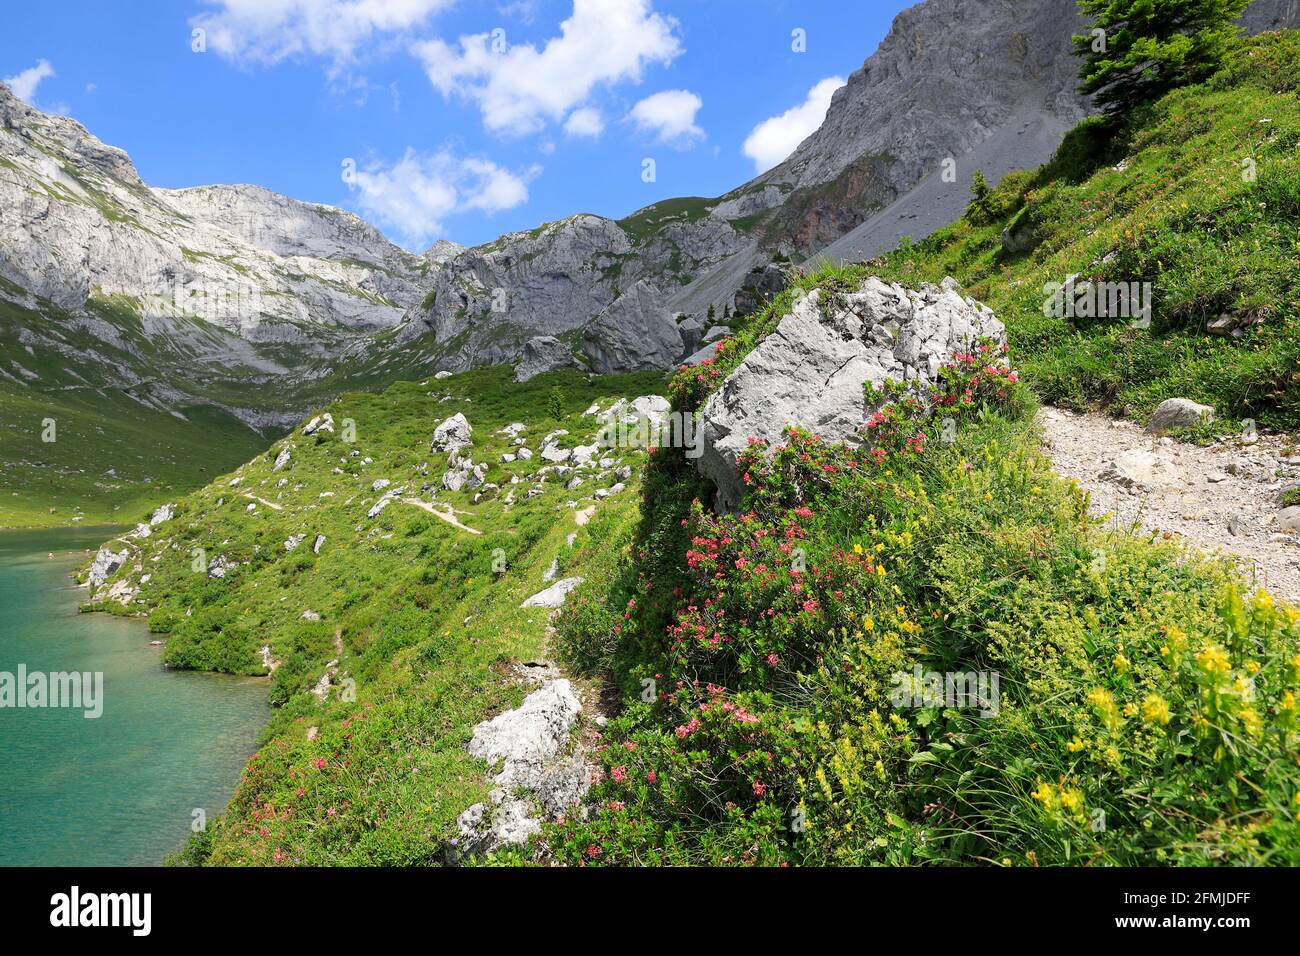 Partnunsee mountain lake and beautiful alpine flowers in the swiss alps, Grisons, Switzerland 2020 Stock Photo